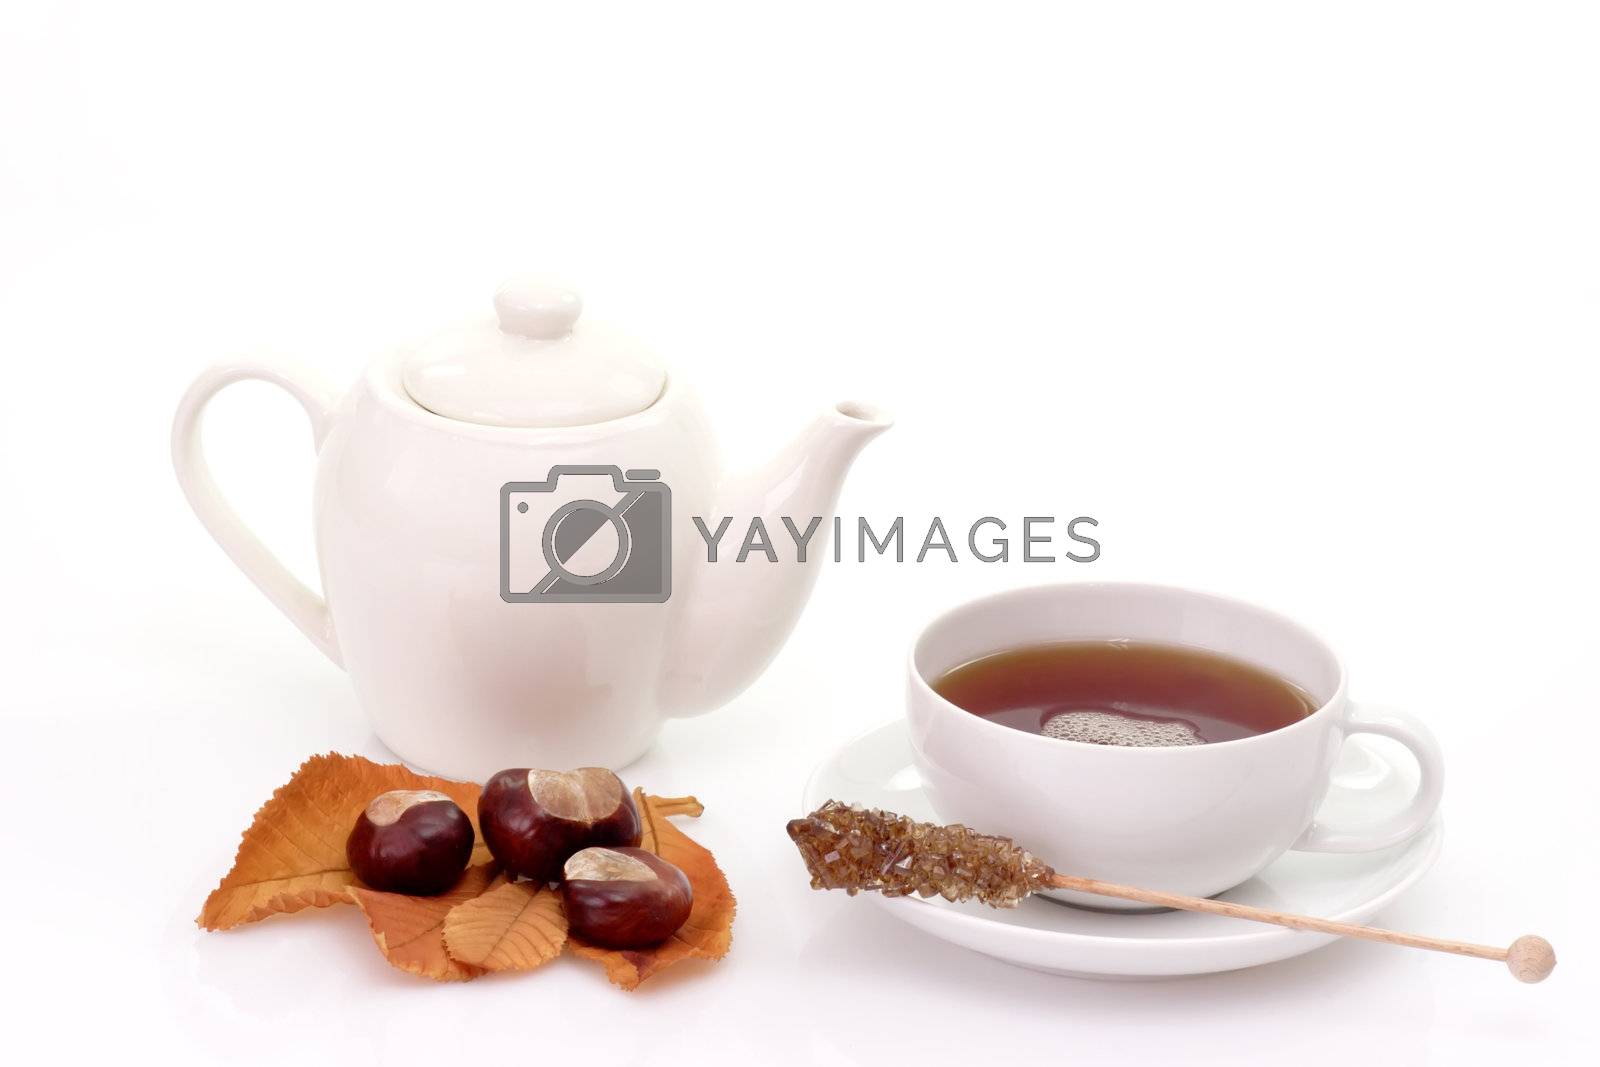 Royalty free image of Tea with teapot by Teamarbeit